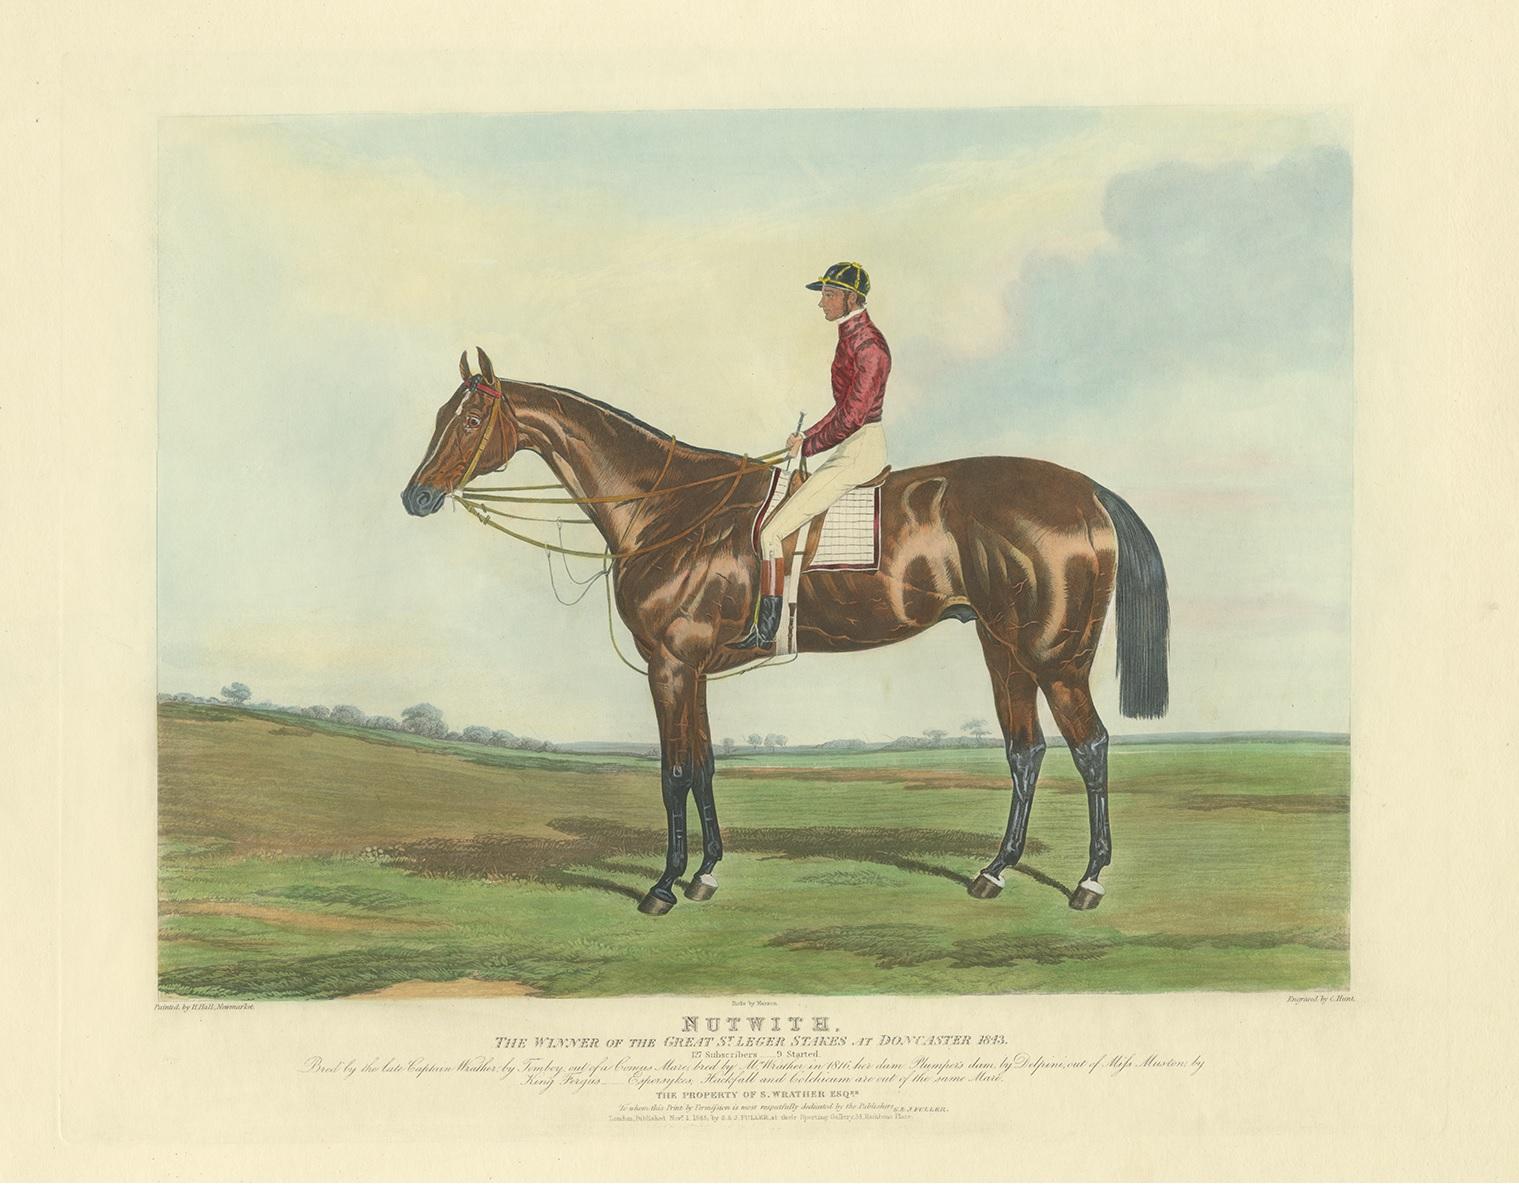 Antique horse print titled 'Nutwith the winner of the Great St. Leger Stakes at Doncaster, 1843'. This aquatint print shows a winning horse and jockey of the Great St. Leger Stakes at Doncaster. Army officer, MP for Grimsby (1768–74) and racing